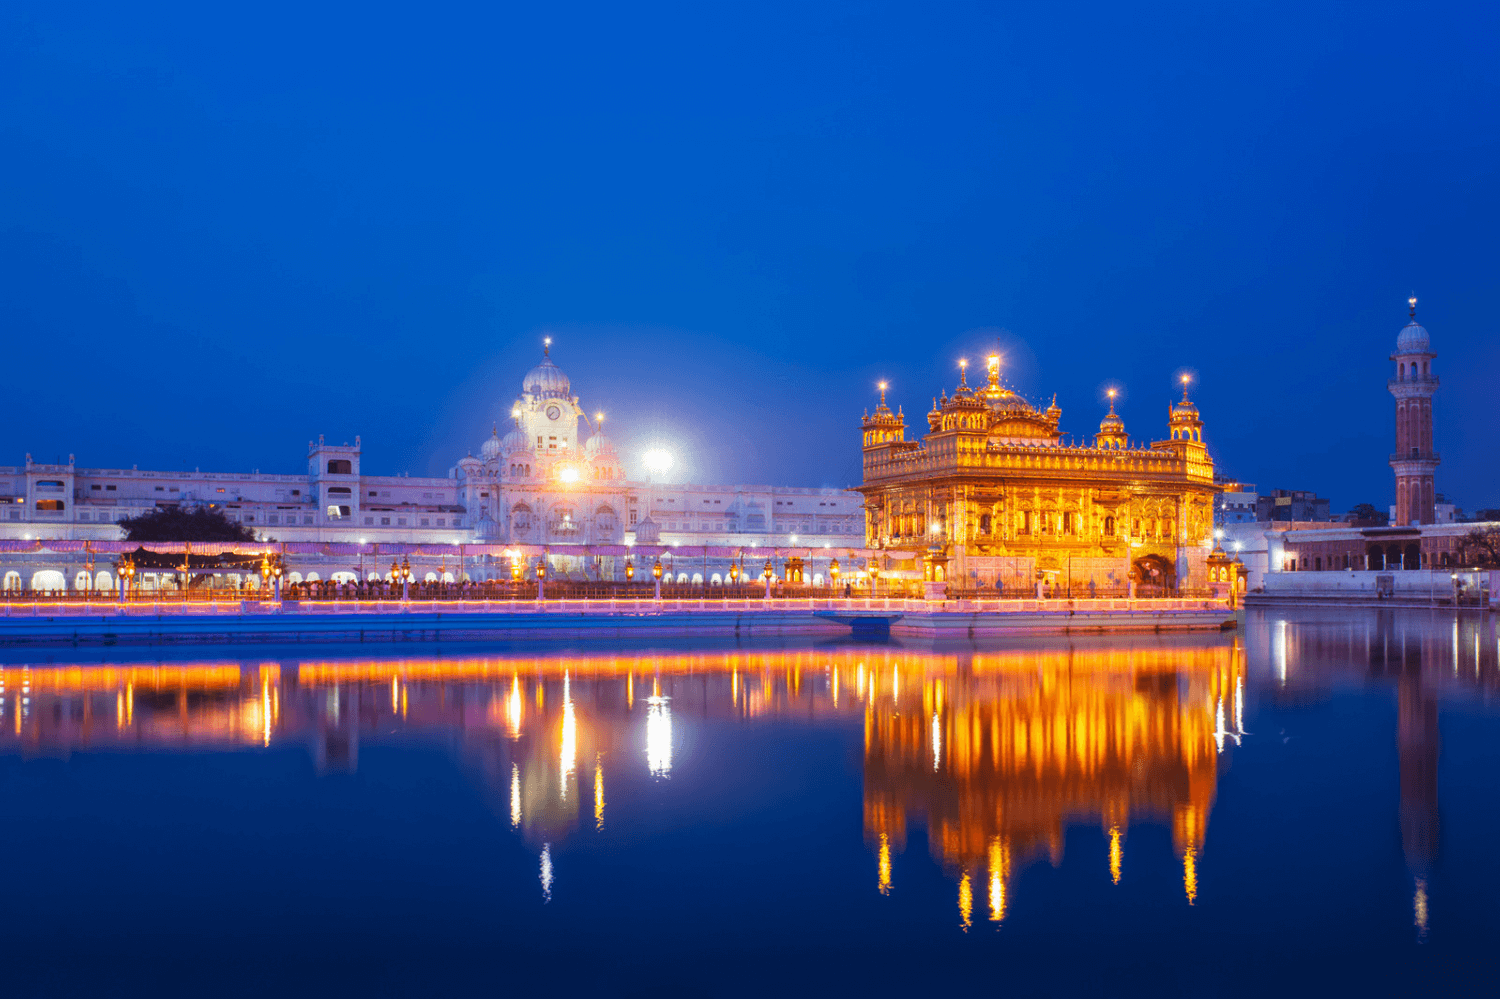 The magnificent Golden Temple in Amritsar, India shimmering at night